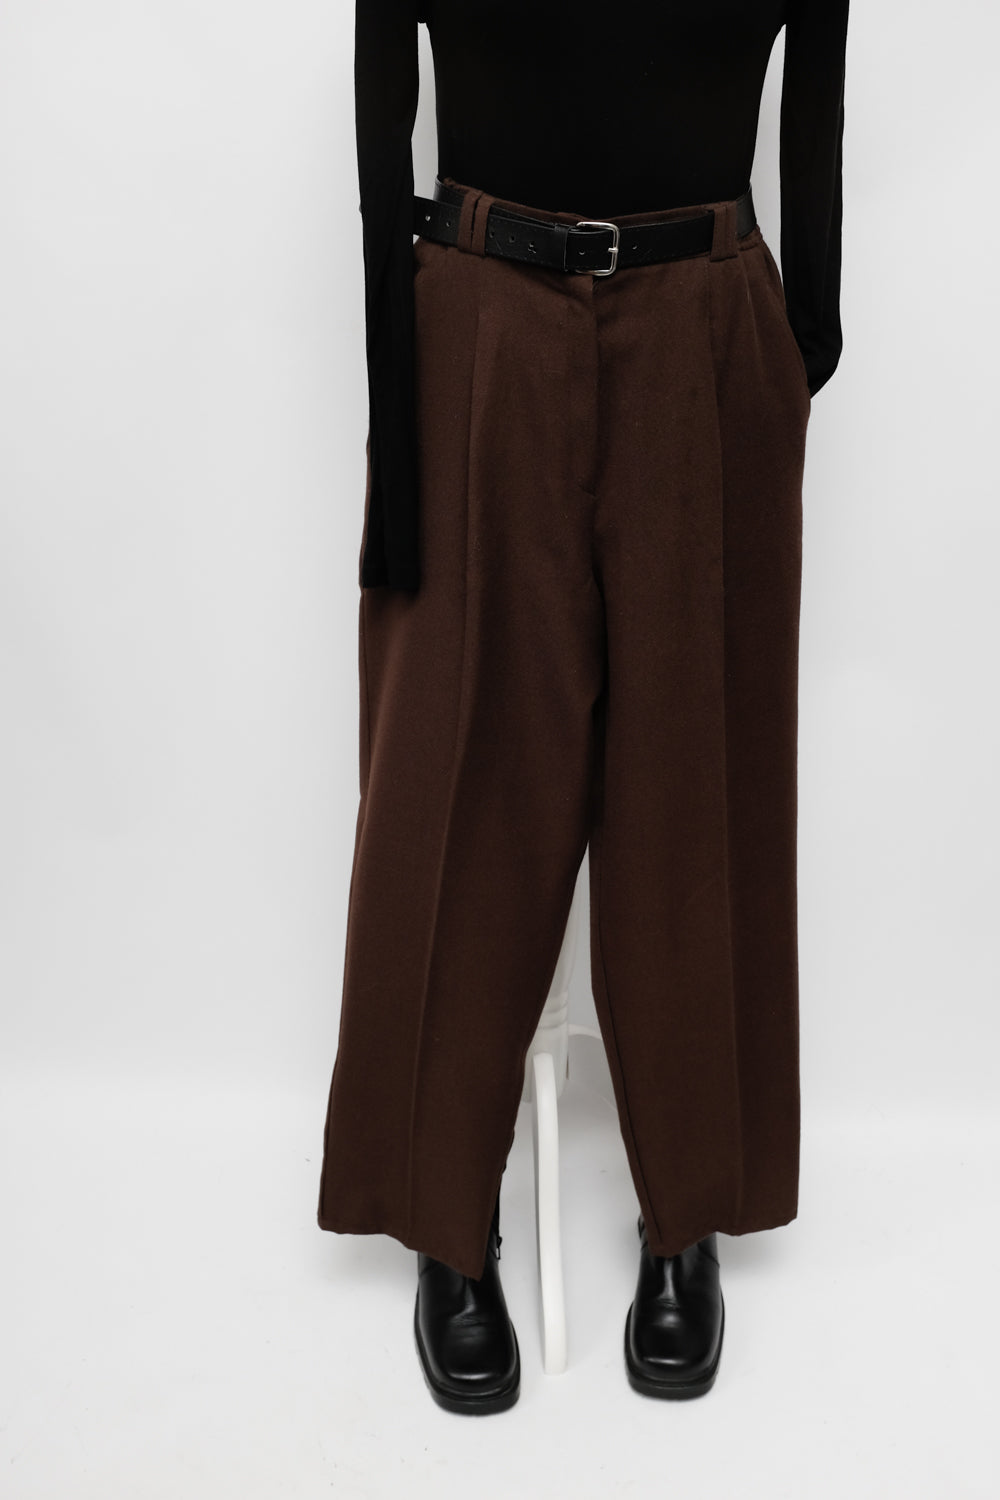 VINTAGE BROWN COSY WARM PLEATED TROUSERS